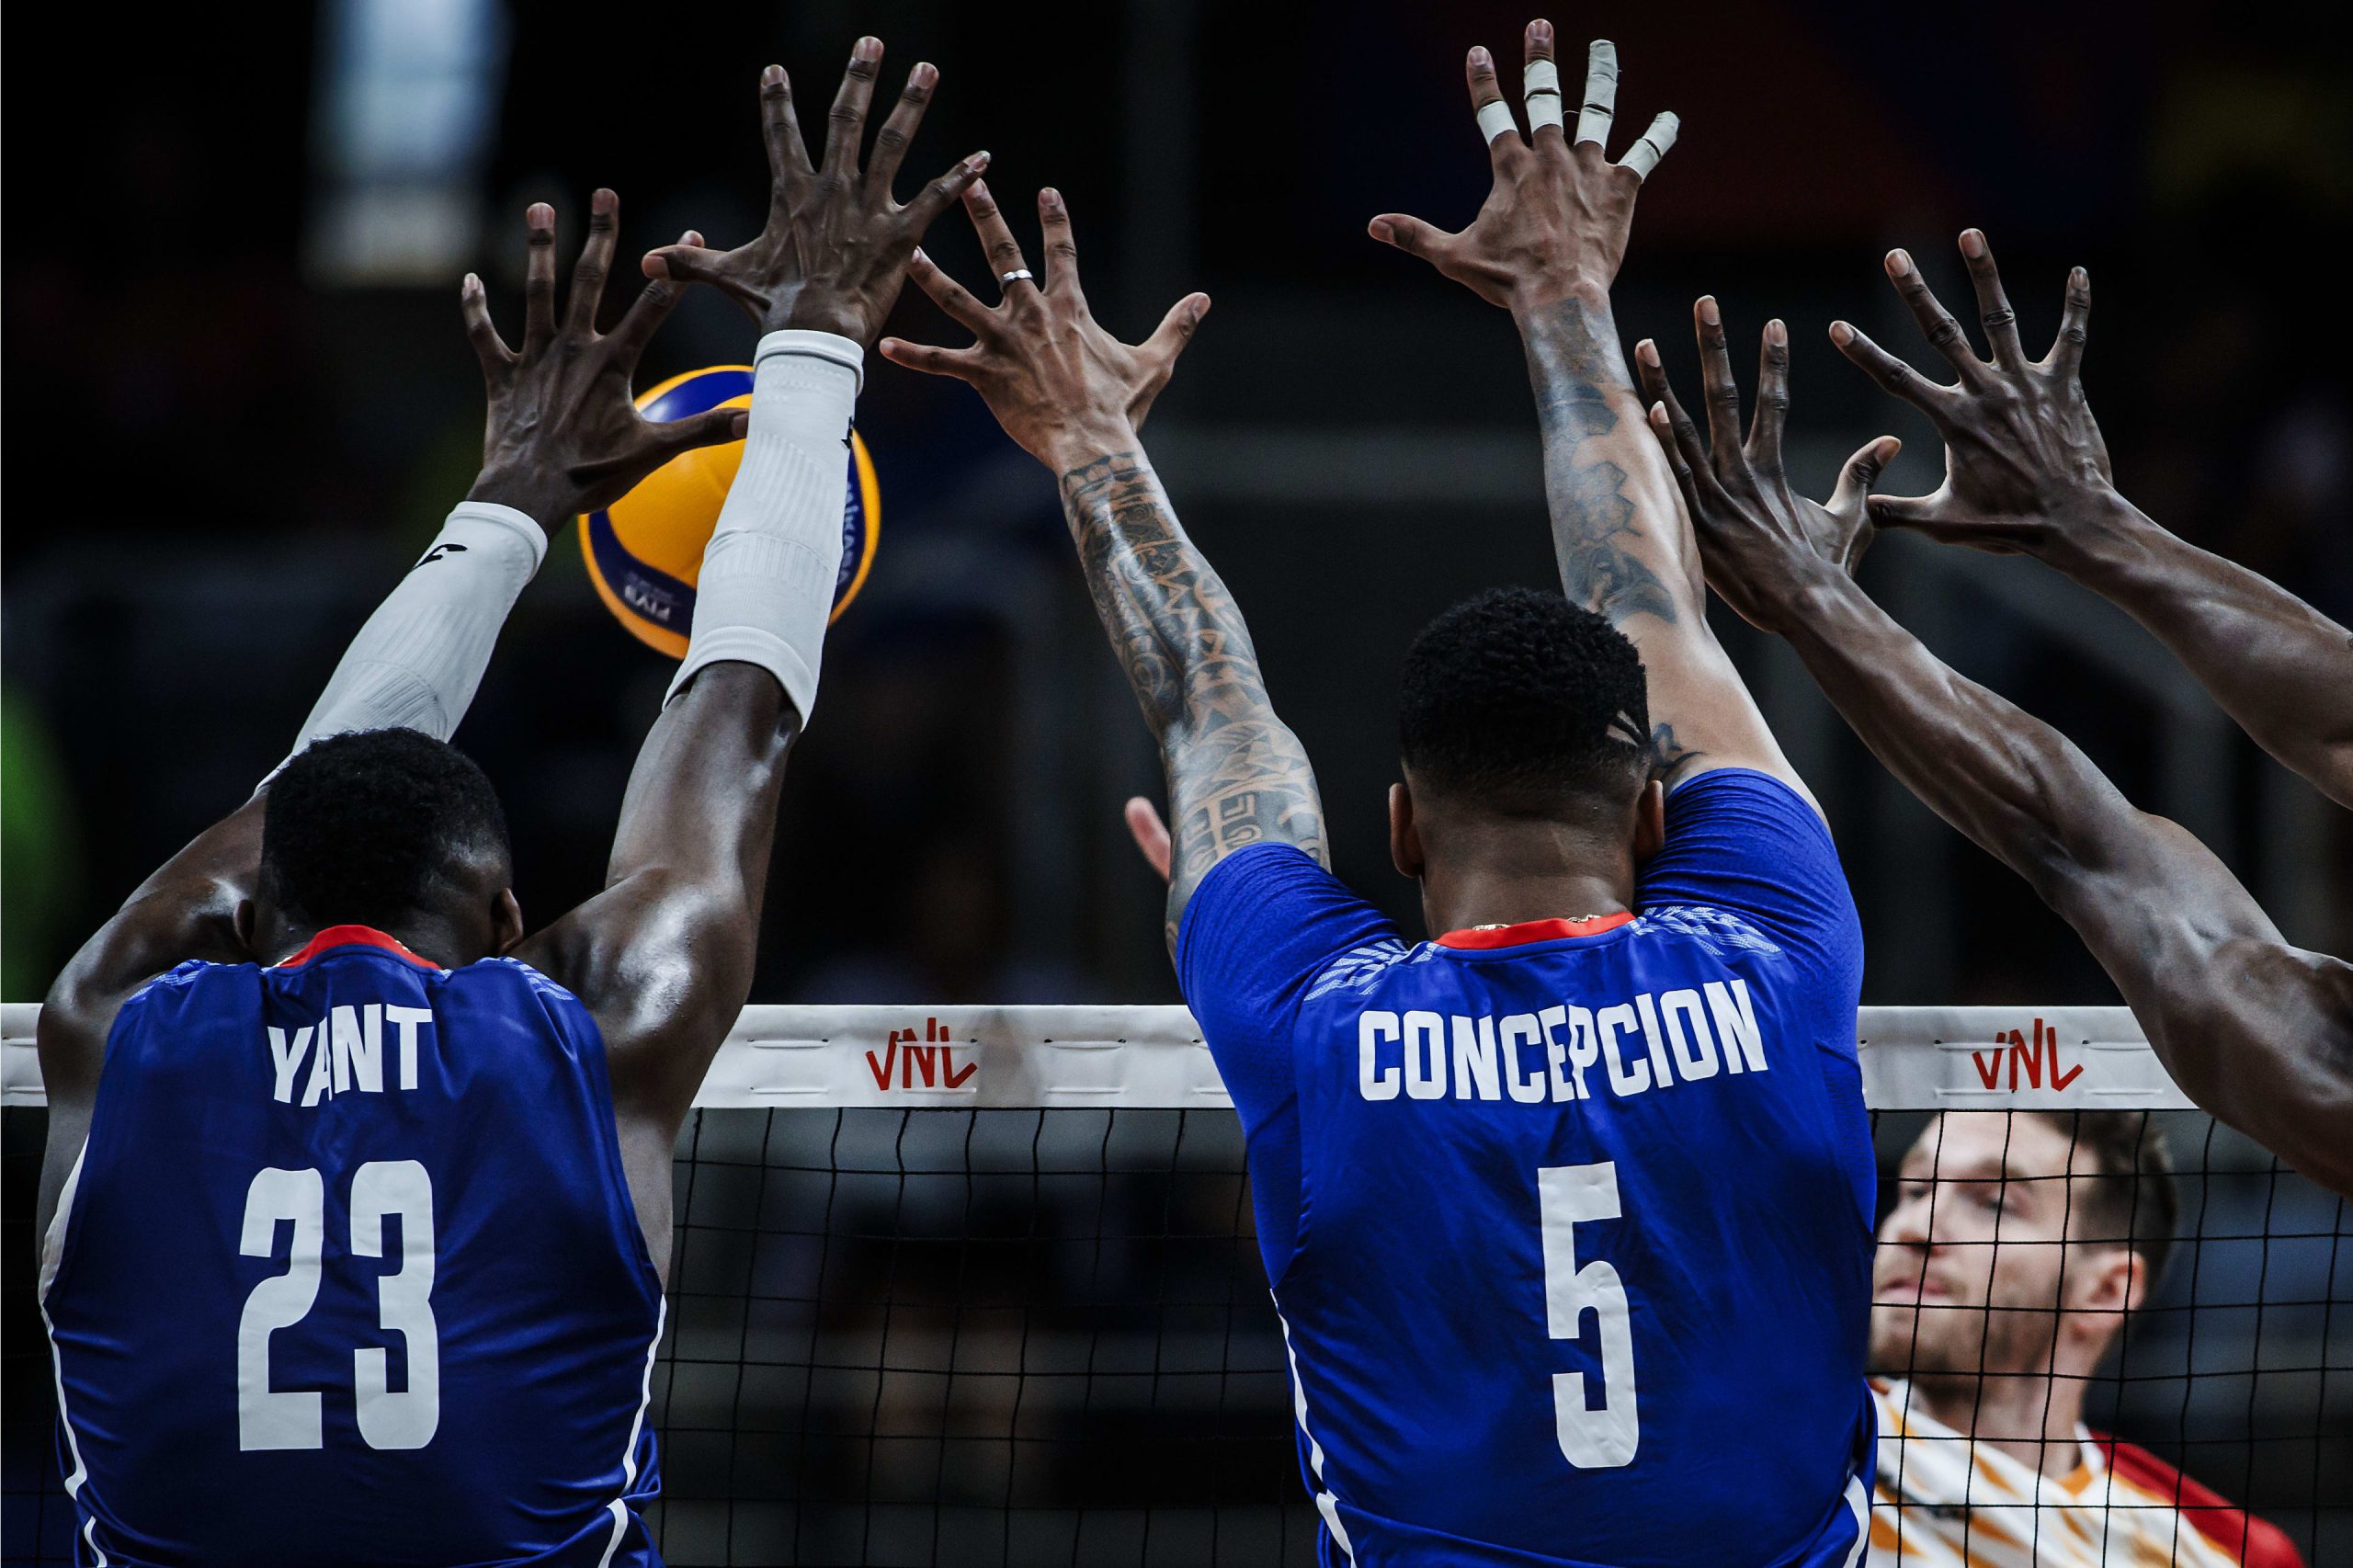 Cuba entered into the Olympic qualification zone